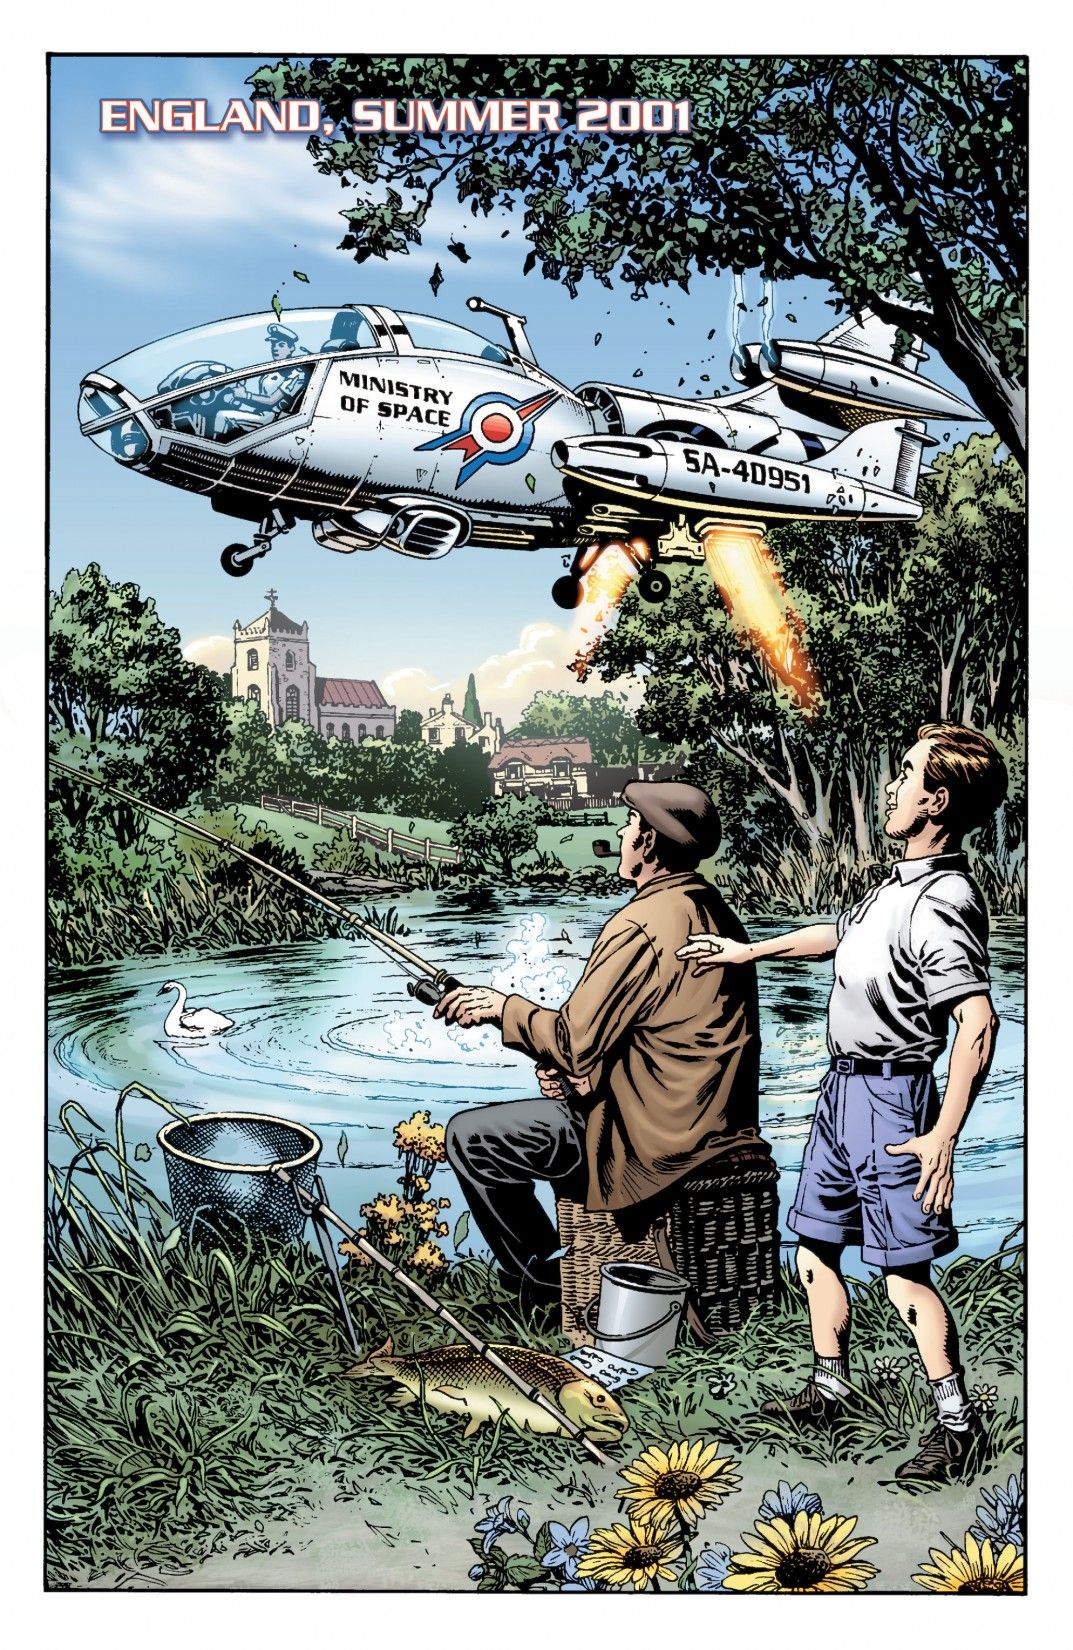 Art from Ministry of Space, a series created by Warren Ellis and Chris Weston